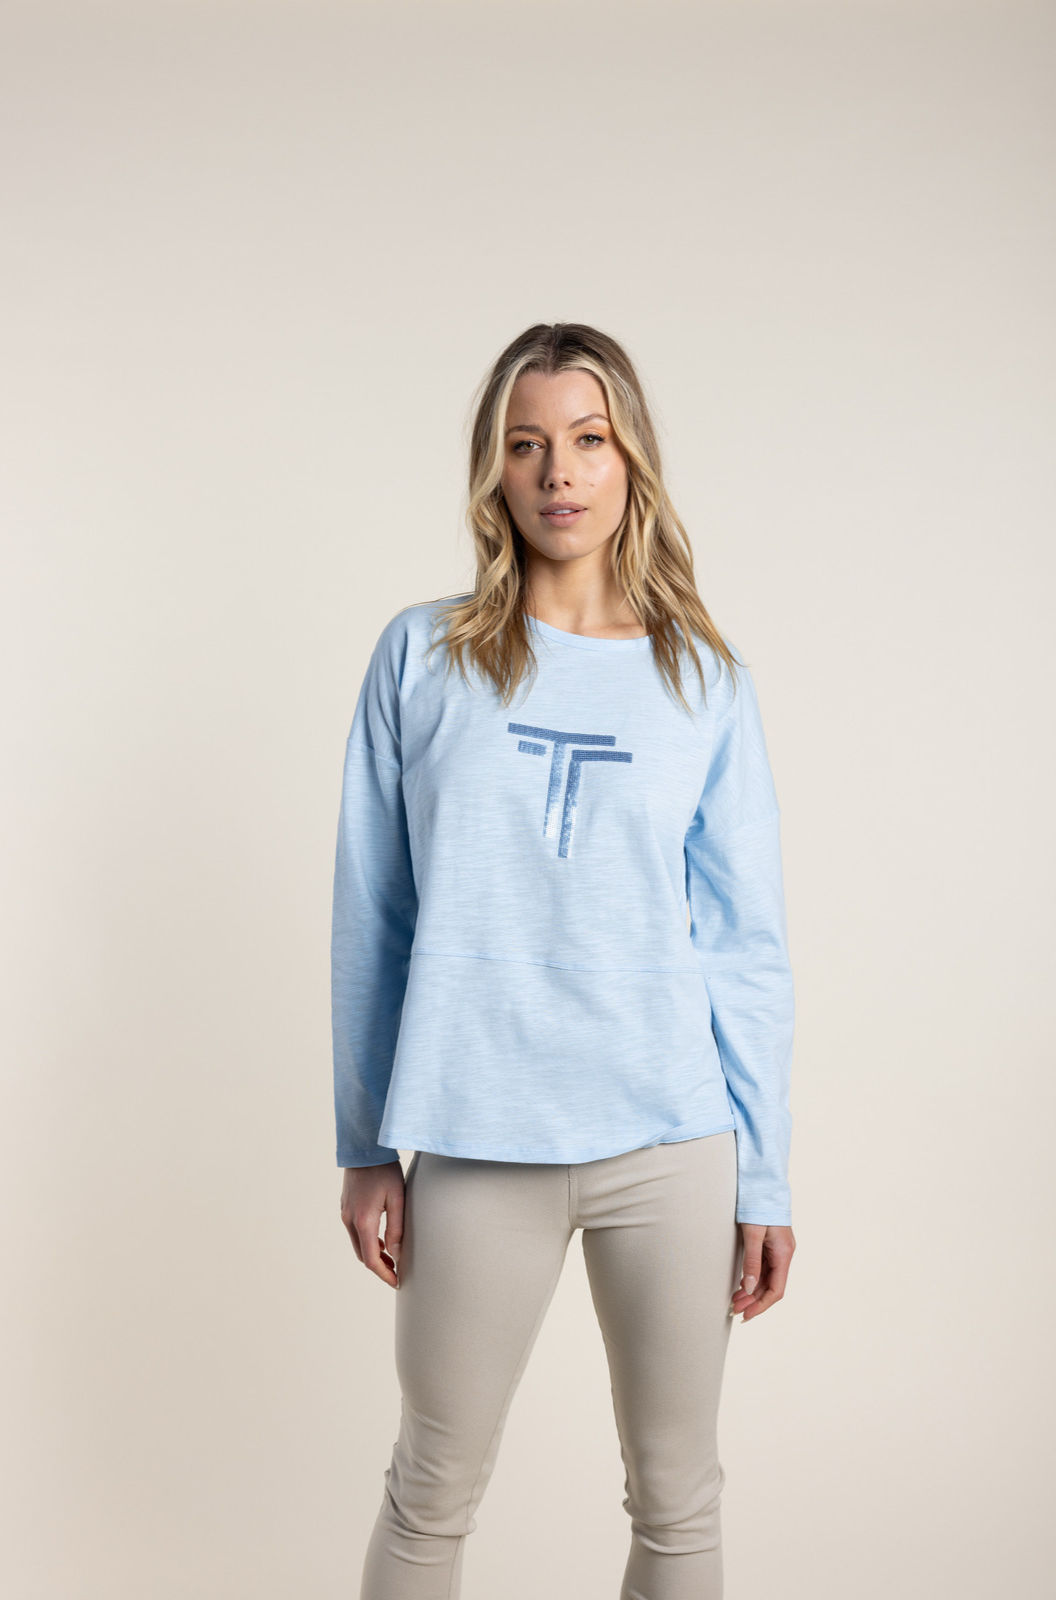 Two T's Sequin Trim Logo Tee in Ice Blue